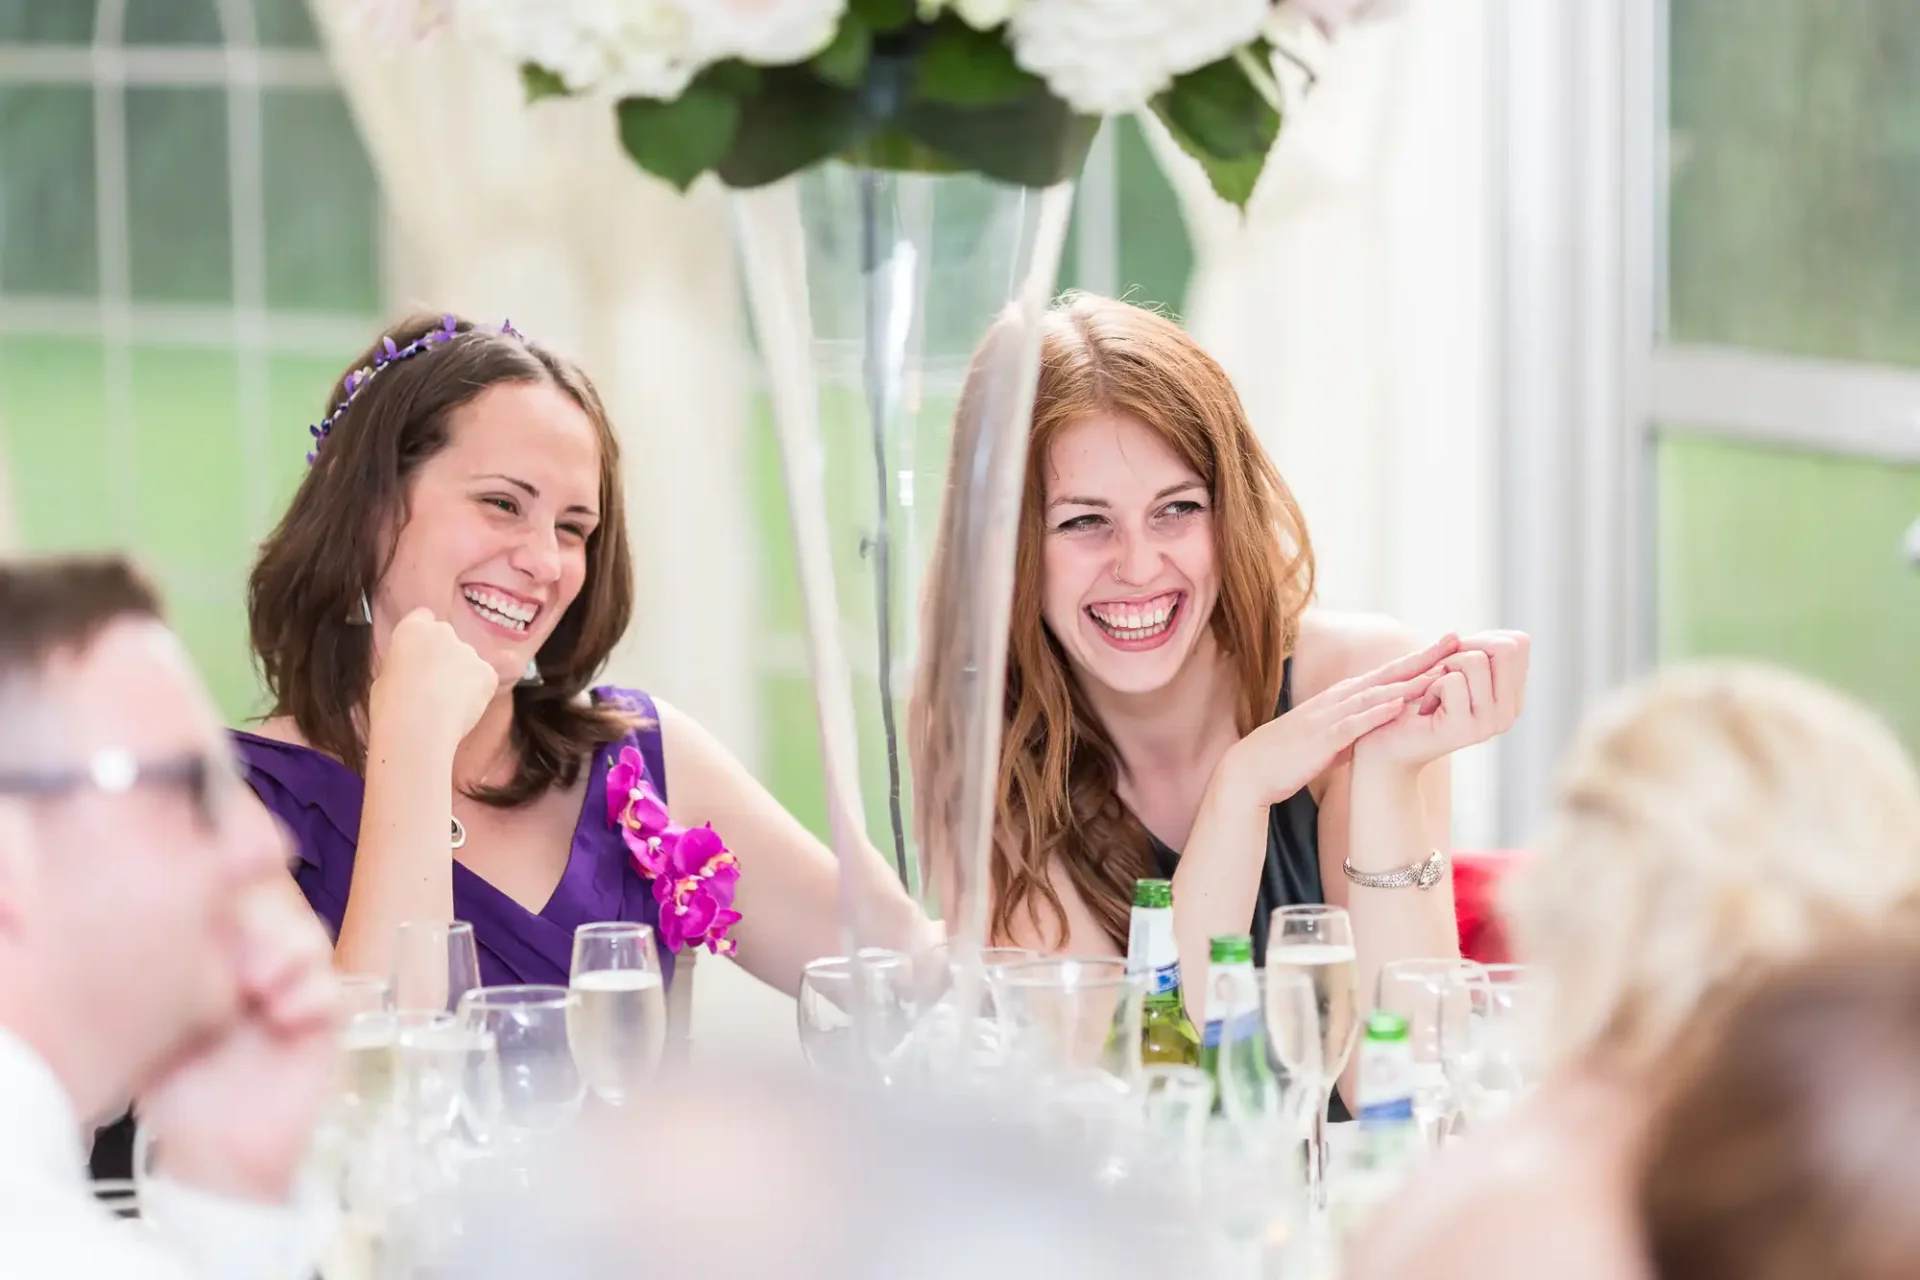 Two women laughing joyfully at a wedding reception table, surrounded by guests and floral decorations.